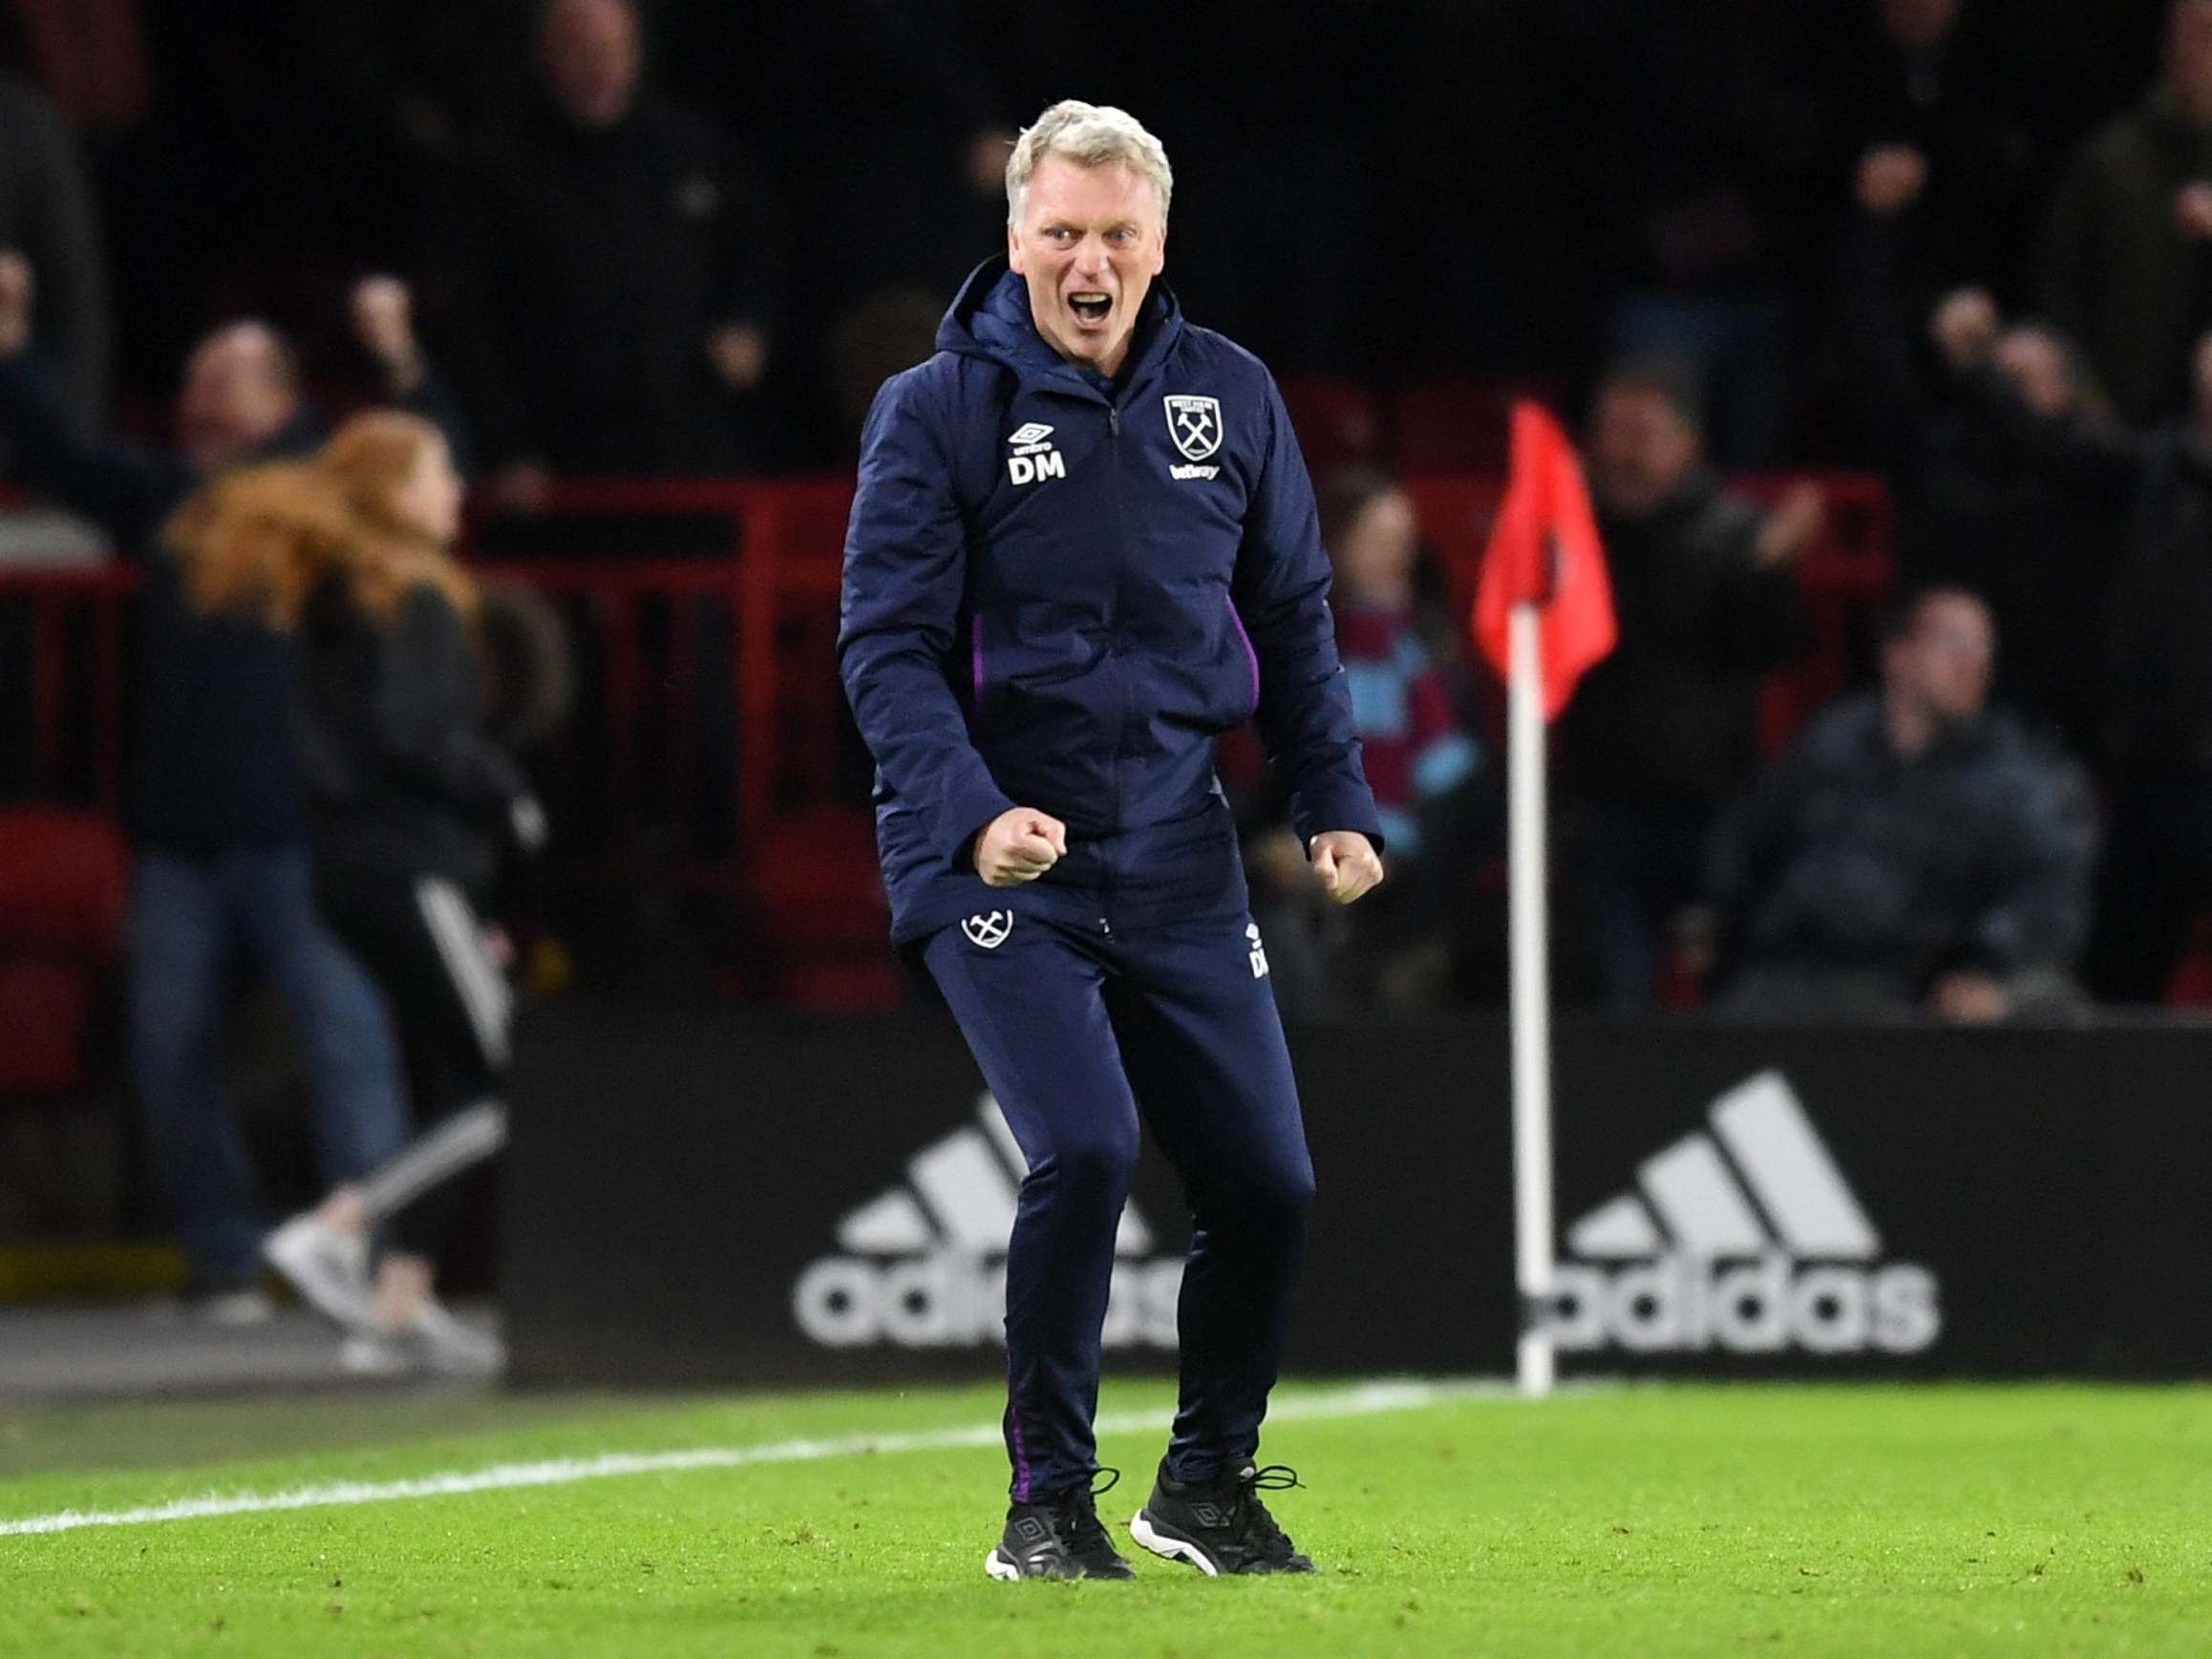 Moyes celebrated the equaliser emphatically before it was ruled out